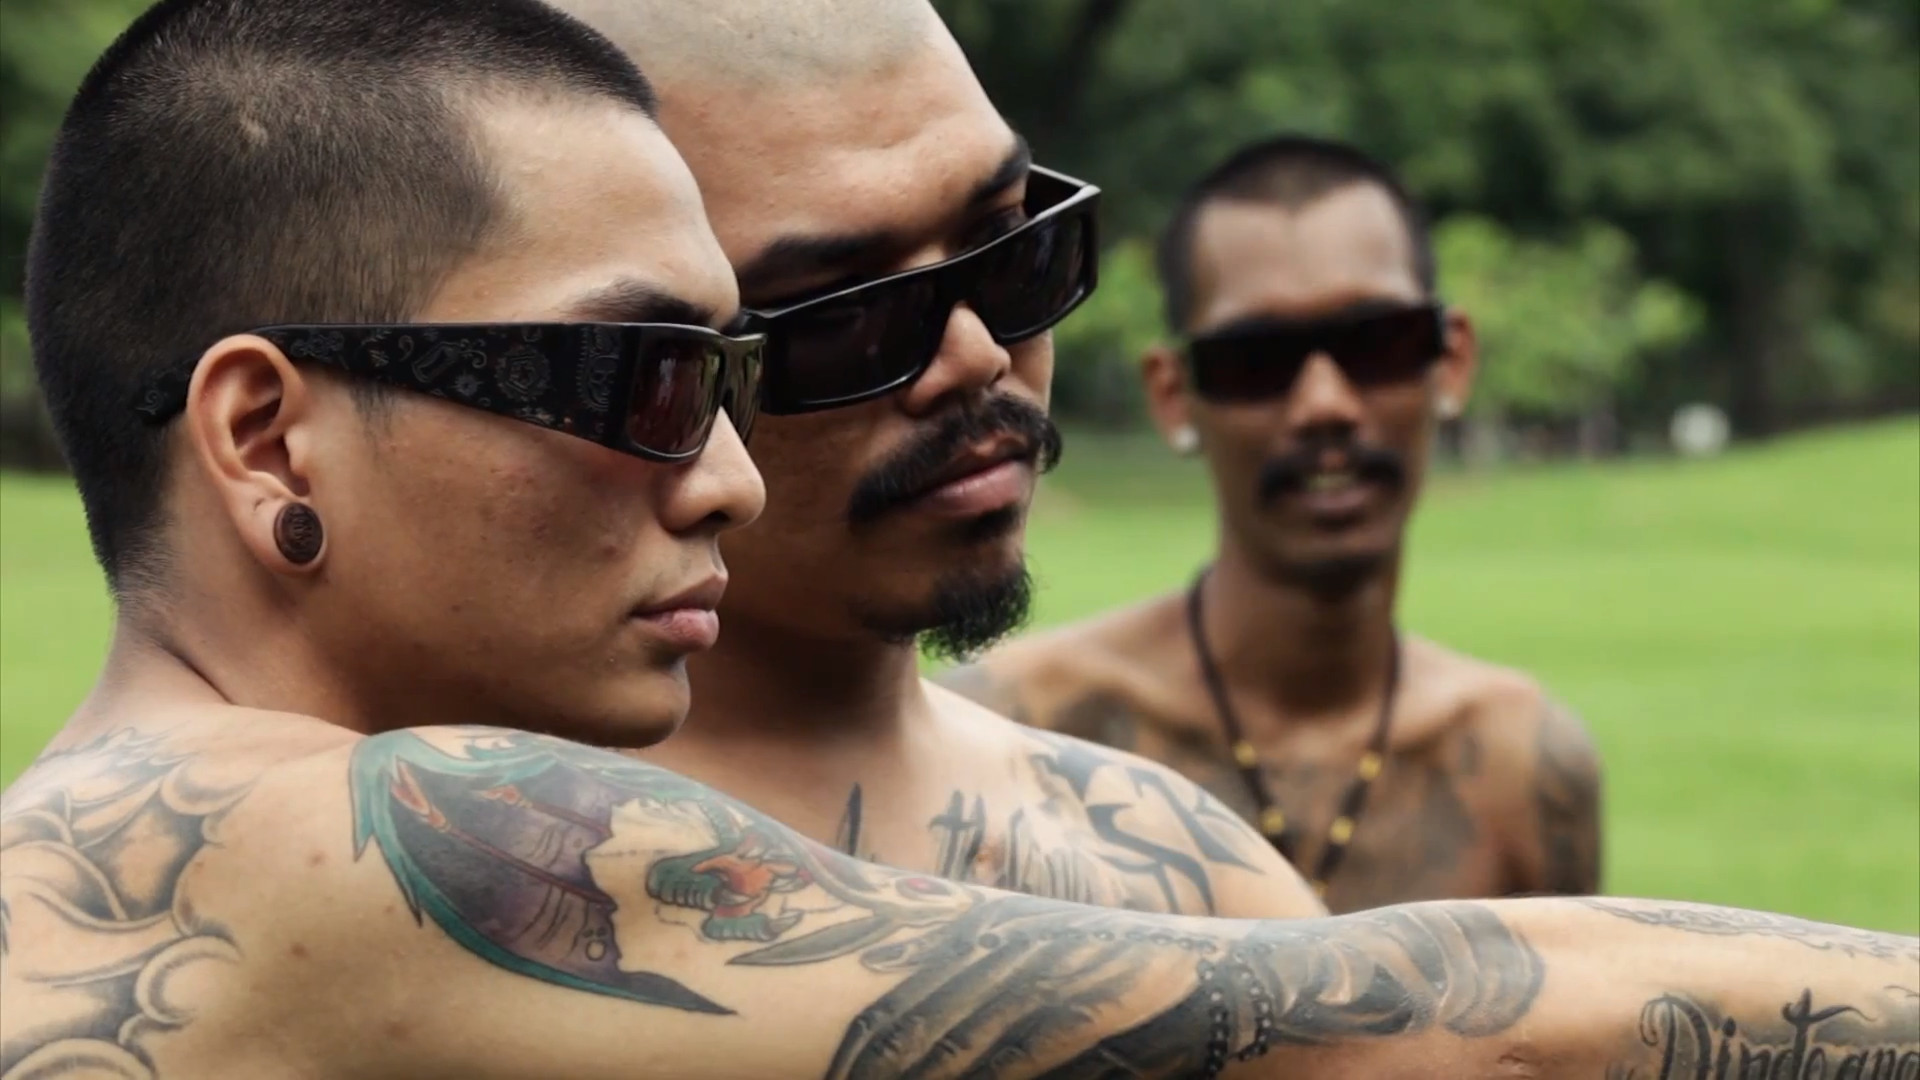 1920x1080 These Men In Thailand Copy The Mexican Gangster Culture. It's Quite The  Sight - Smatterist